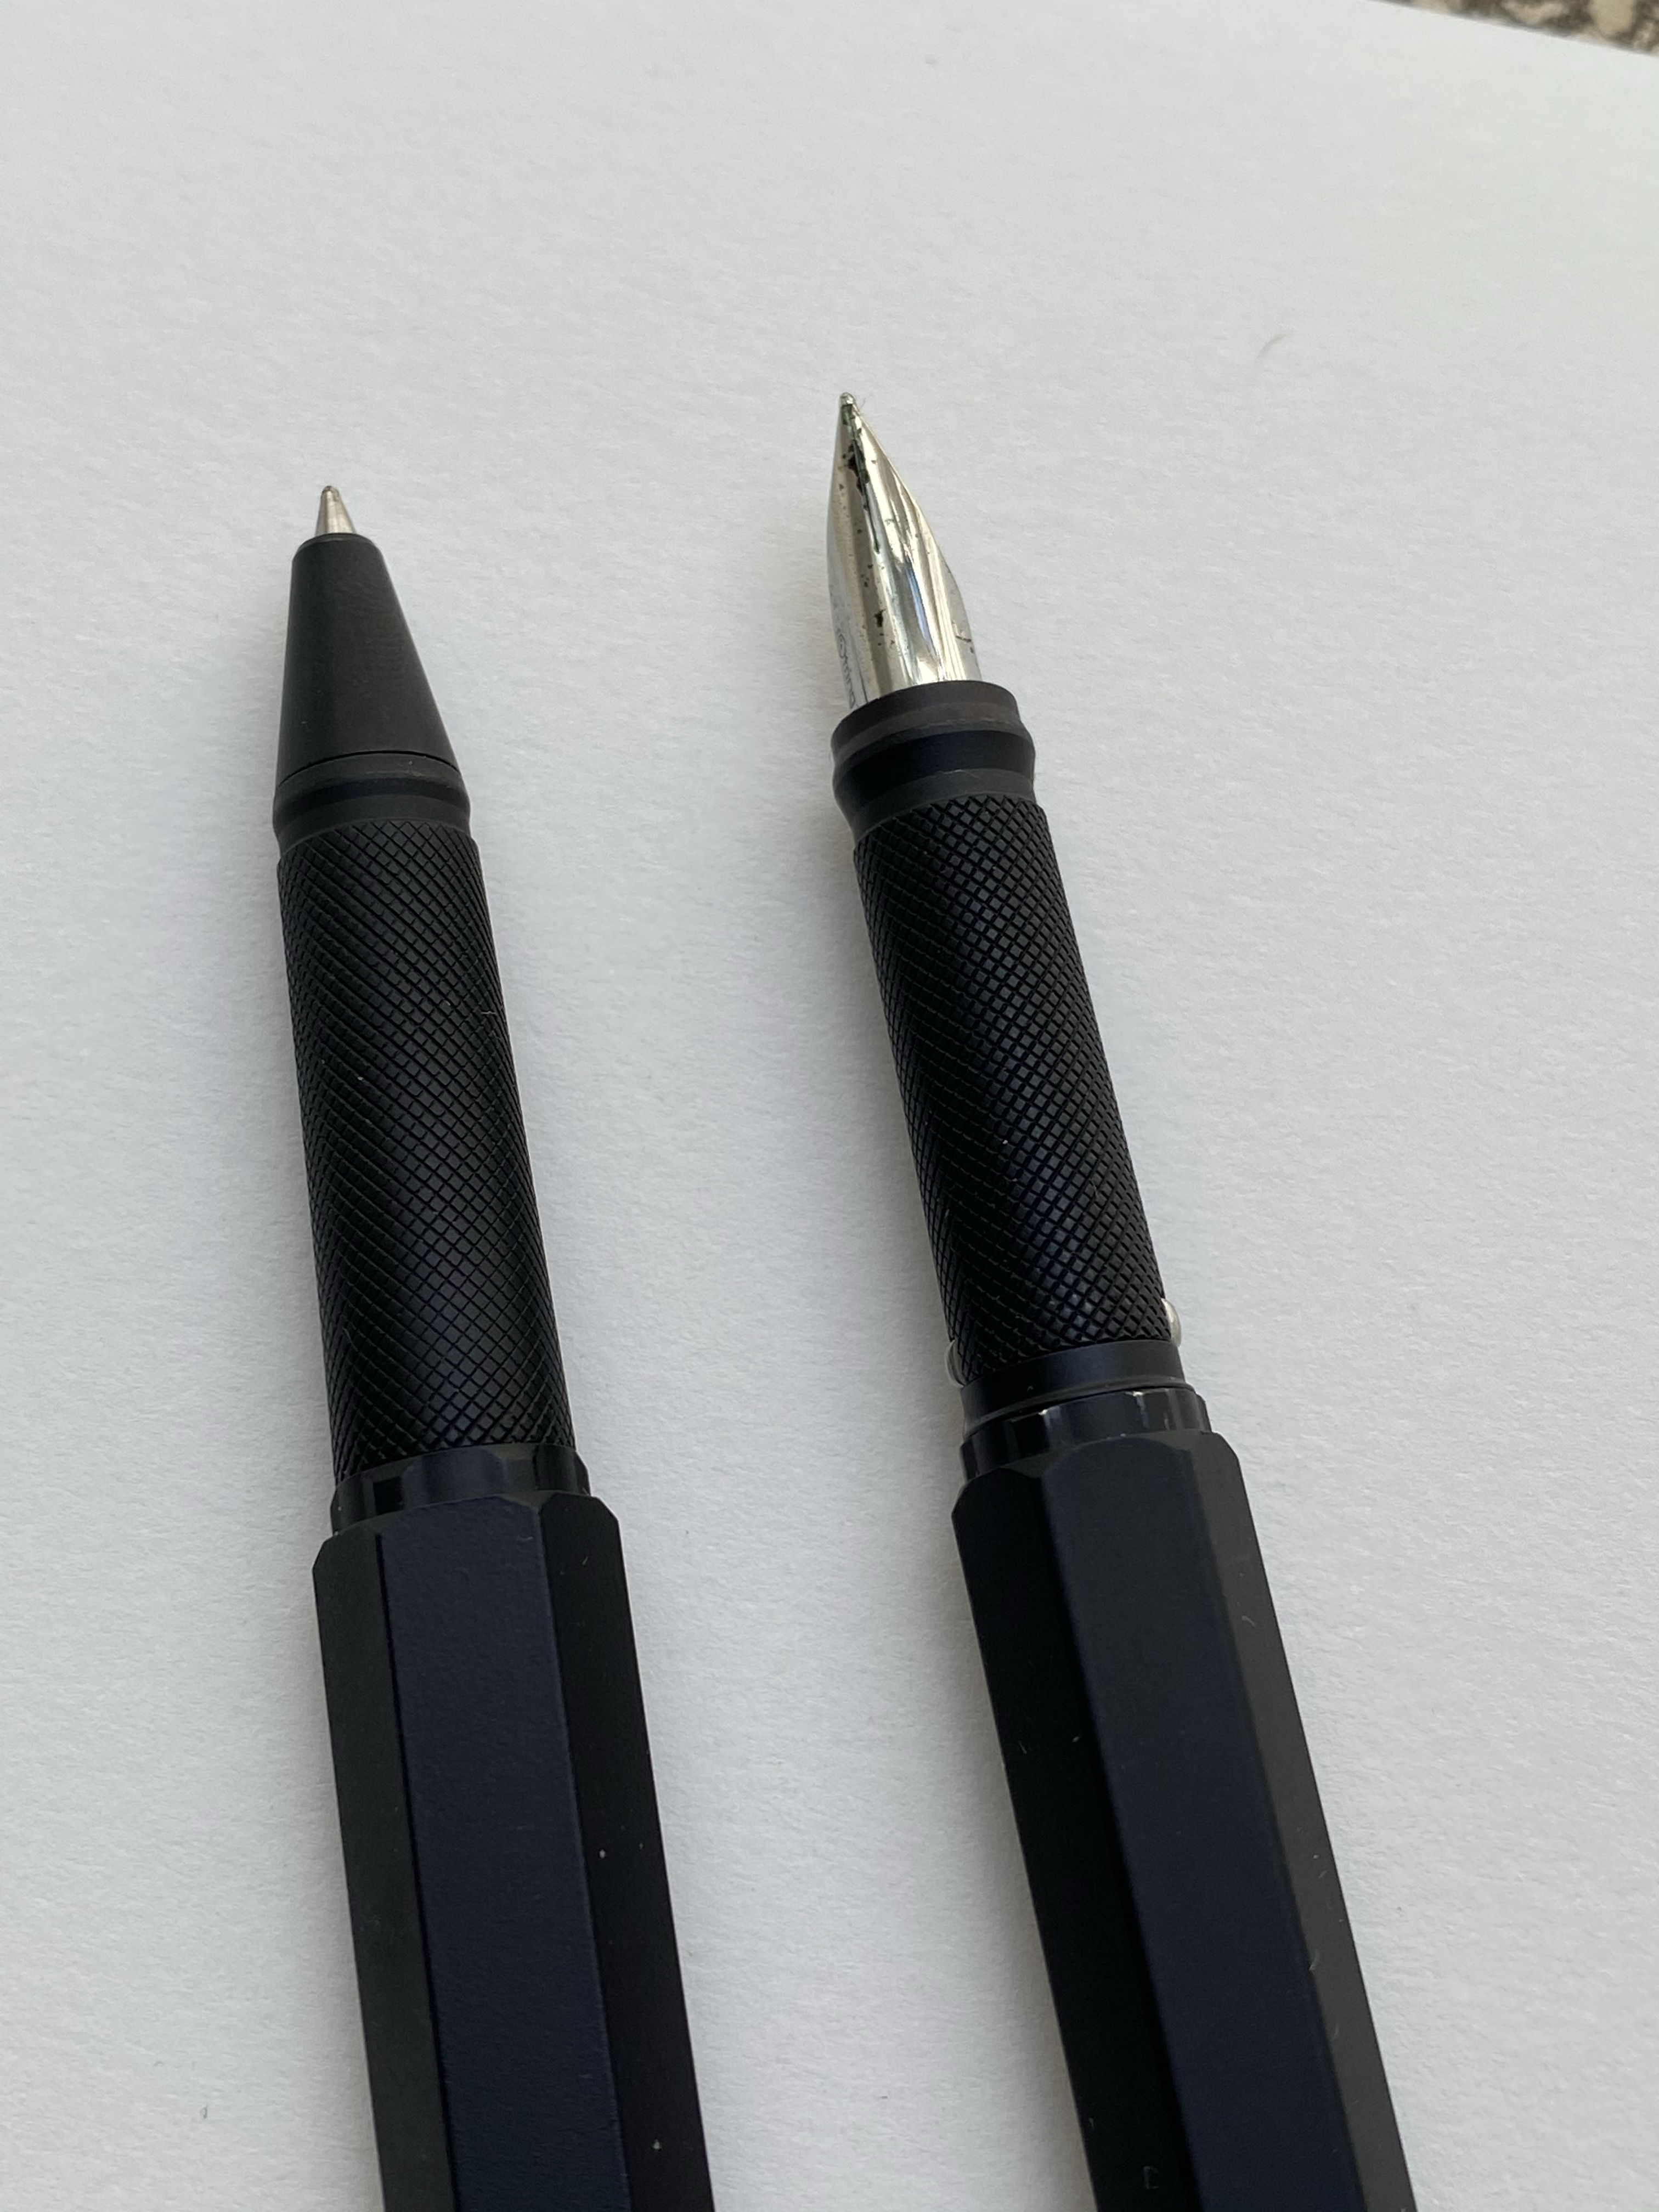 Can I dip my fountain pen in ink? – LeStallion